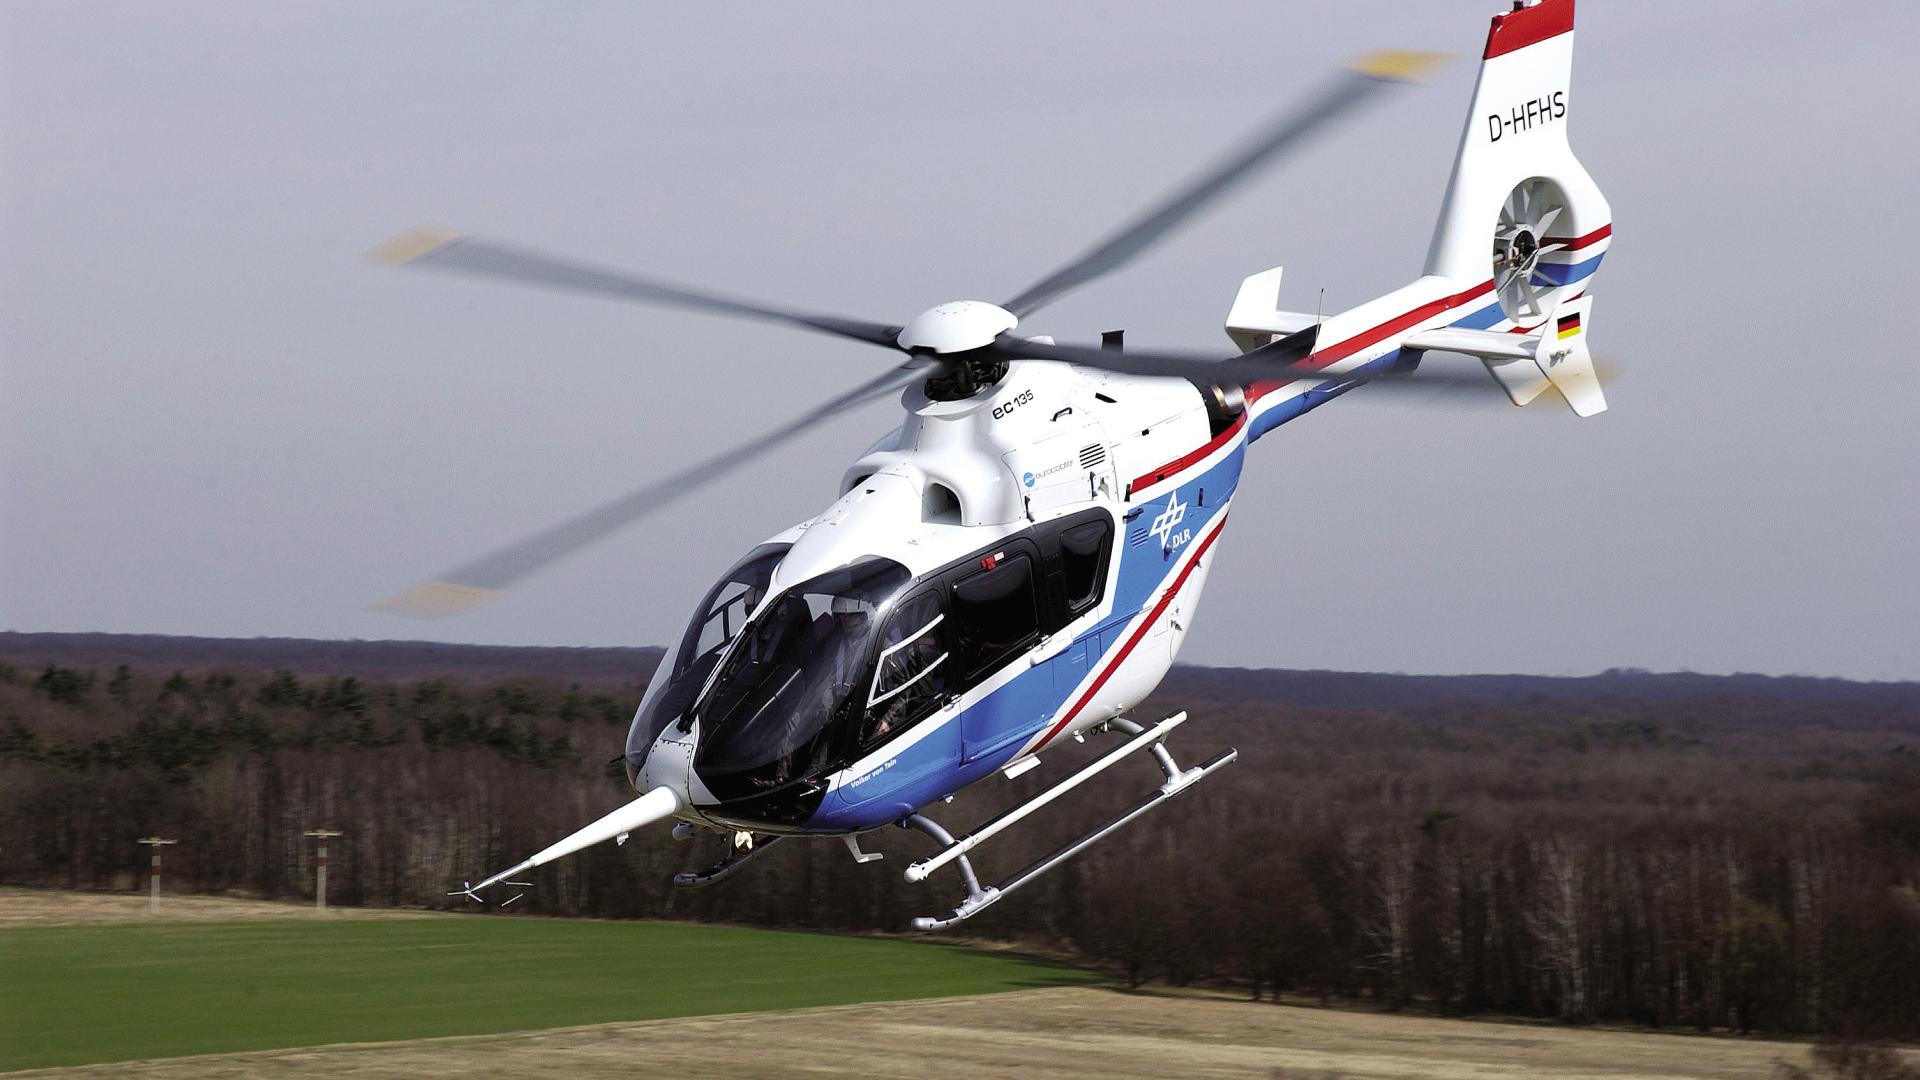 Airbus Helicopter EC 135 D-HFHS